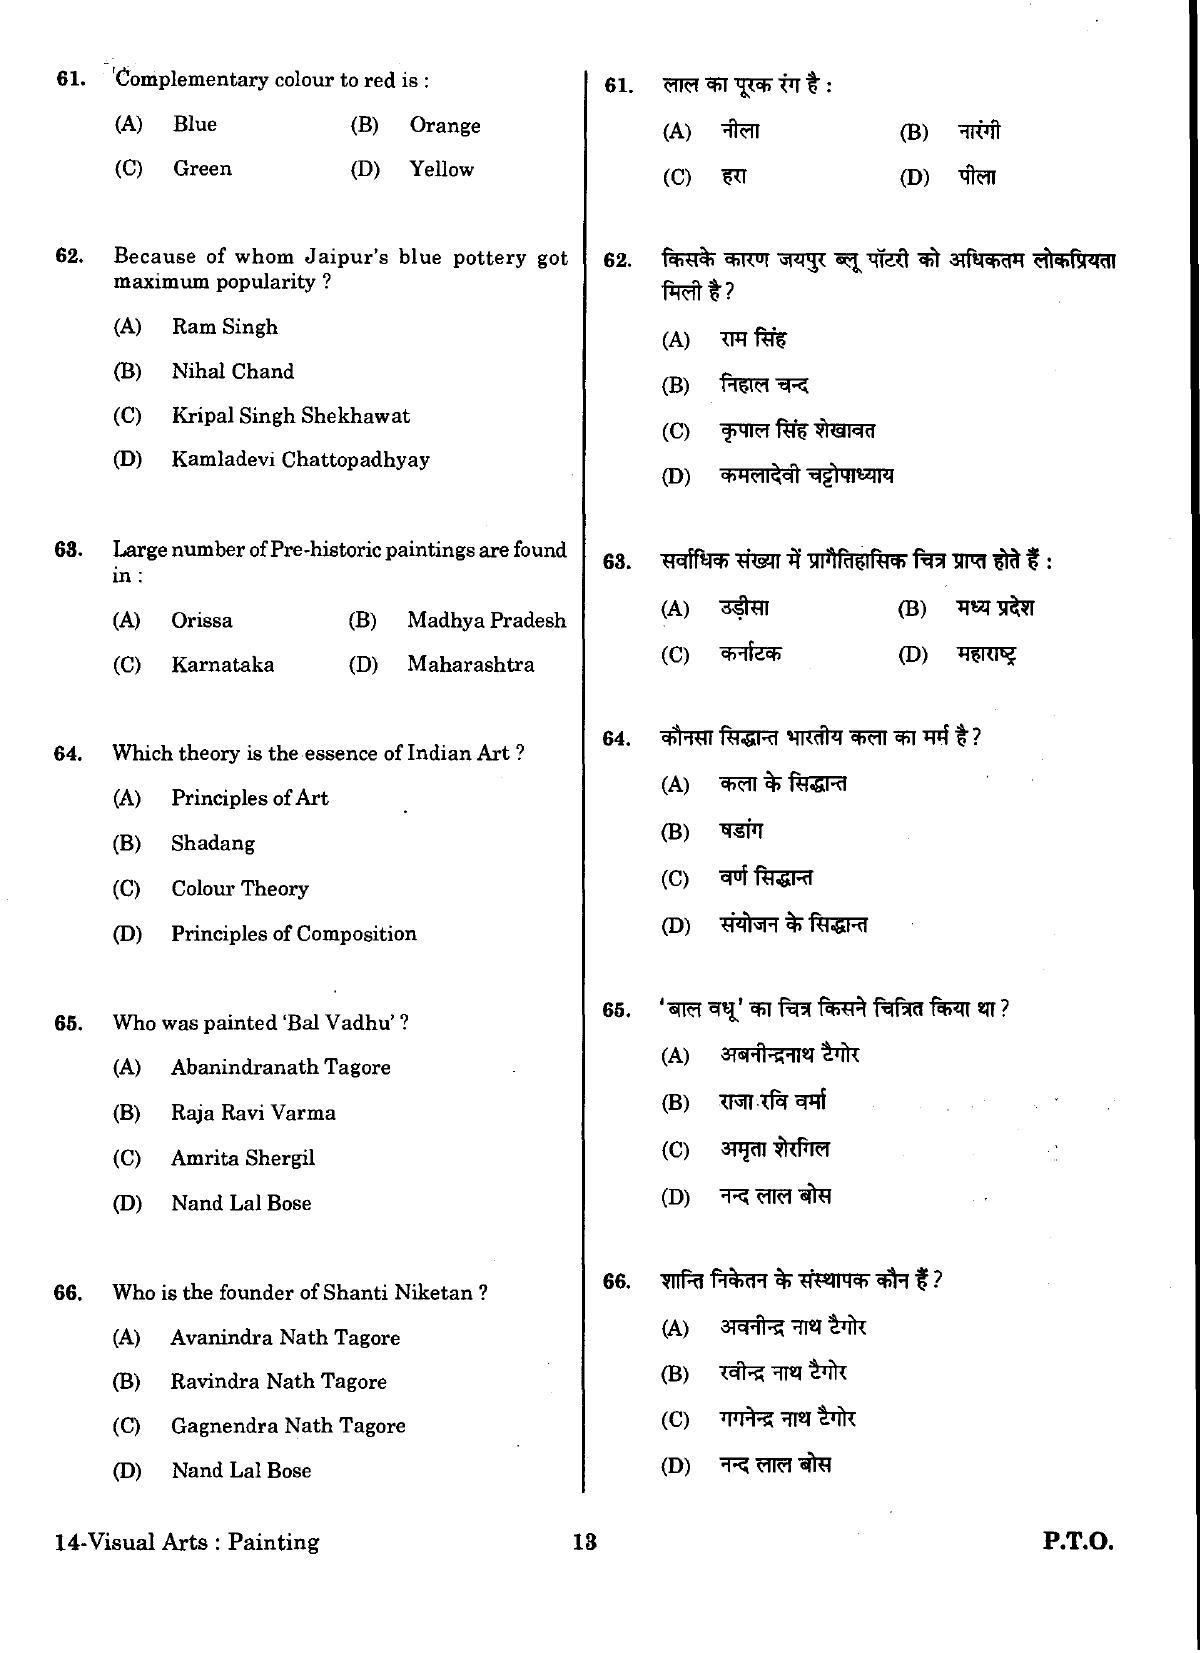 URATPG Visual Arts Painting Sample Question Paper 2018 - Page 12